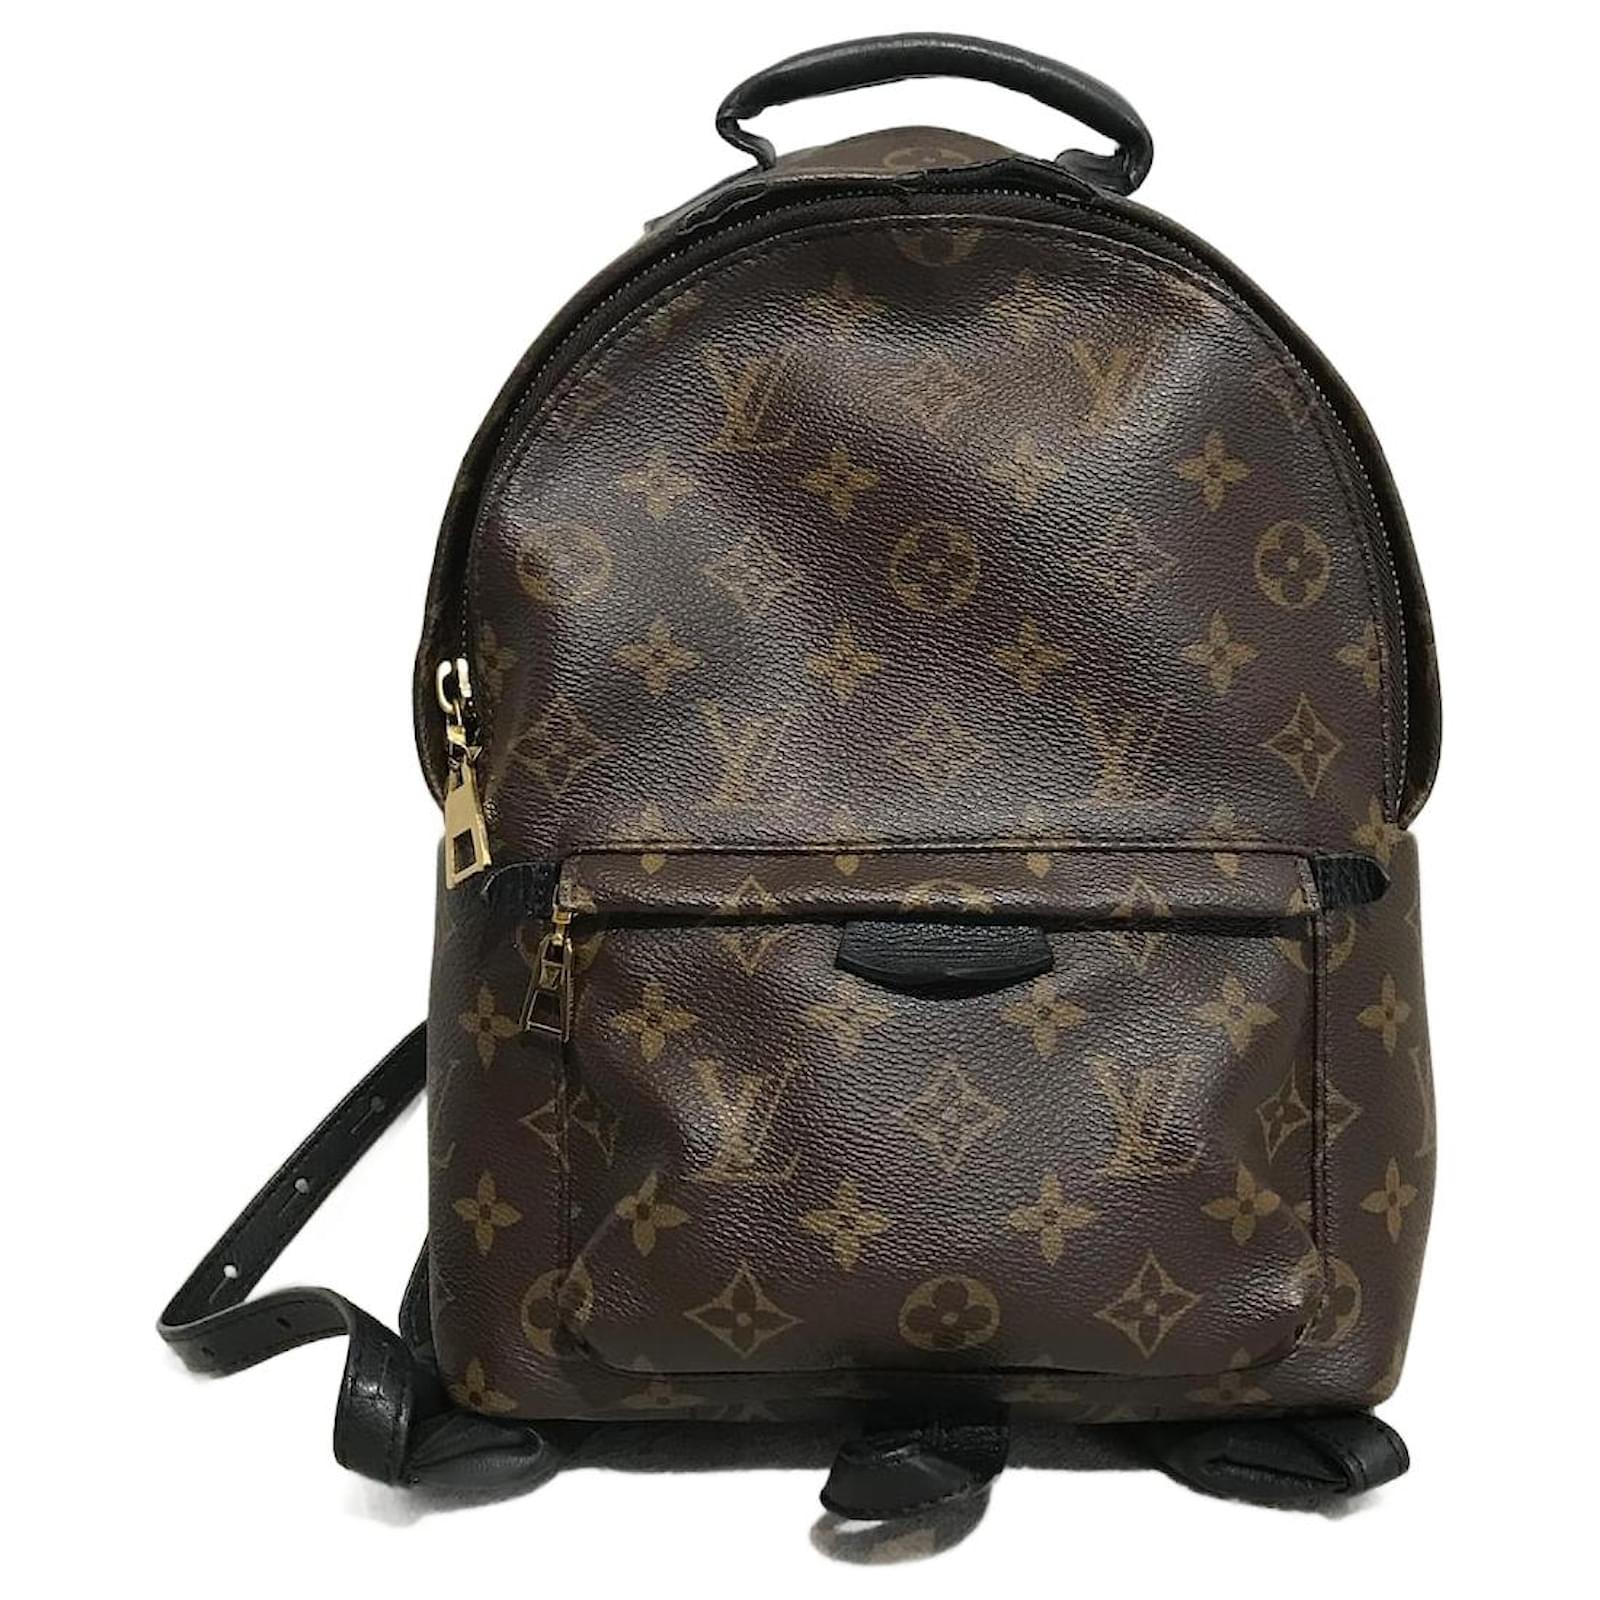 Louis Vuitton By the Pool Mini Backpack, New in Dustbag